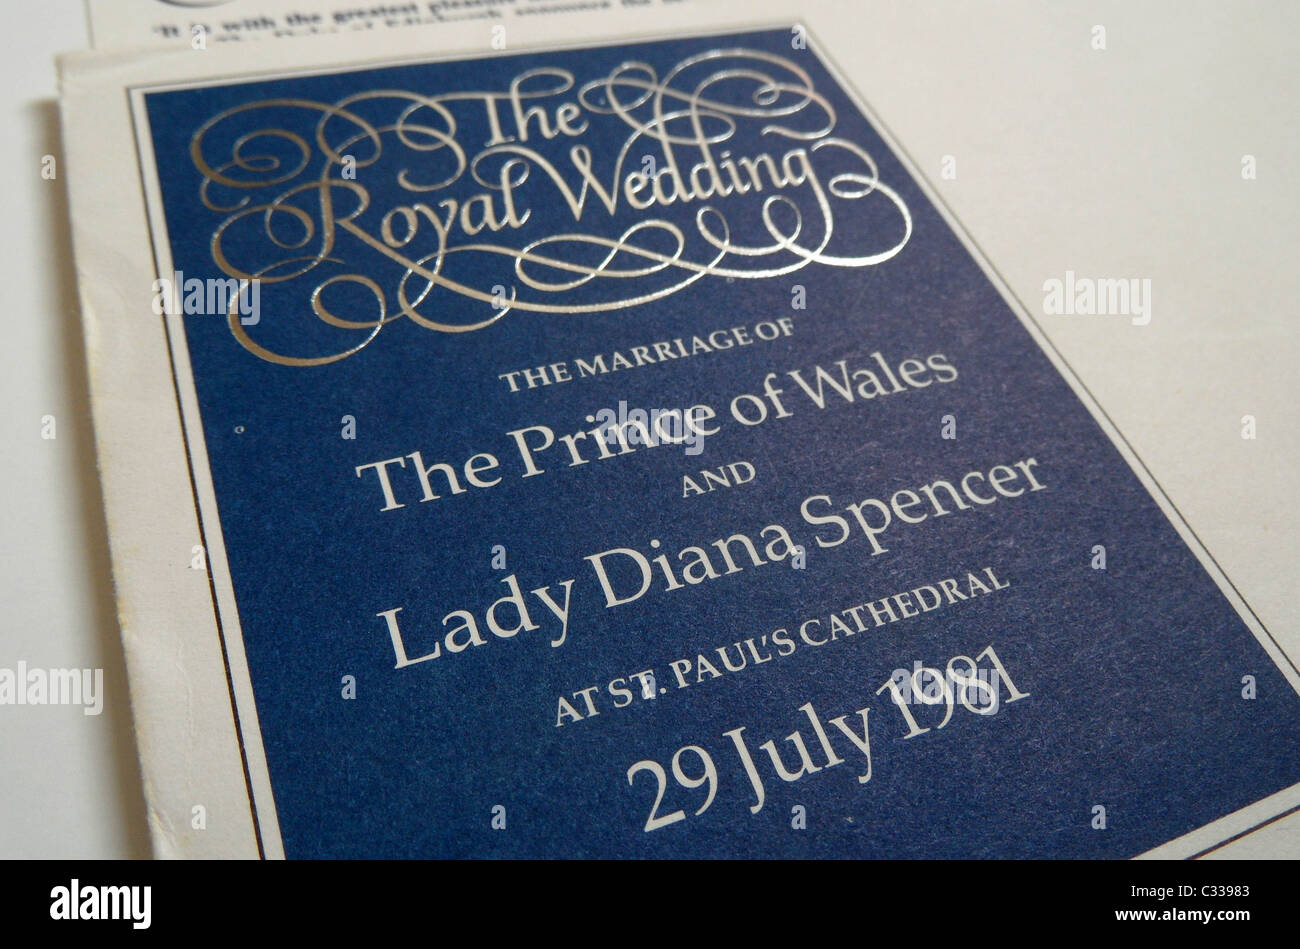 First day cover stamp issued for the Marriage of Prince Charles and Lady Diana Spencer on 29th July 1981. Stock Photo